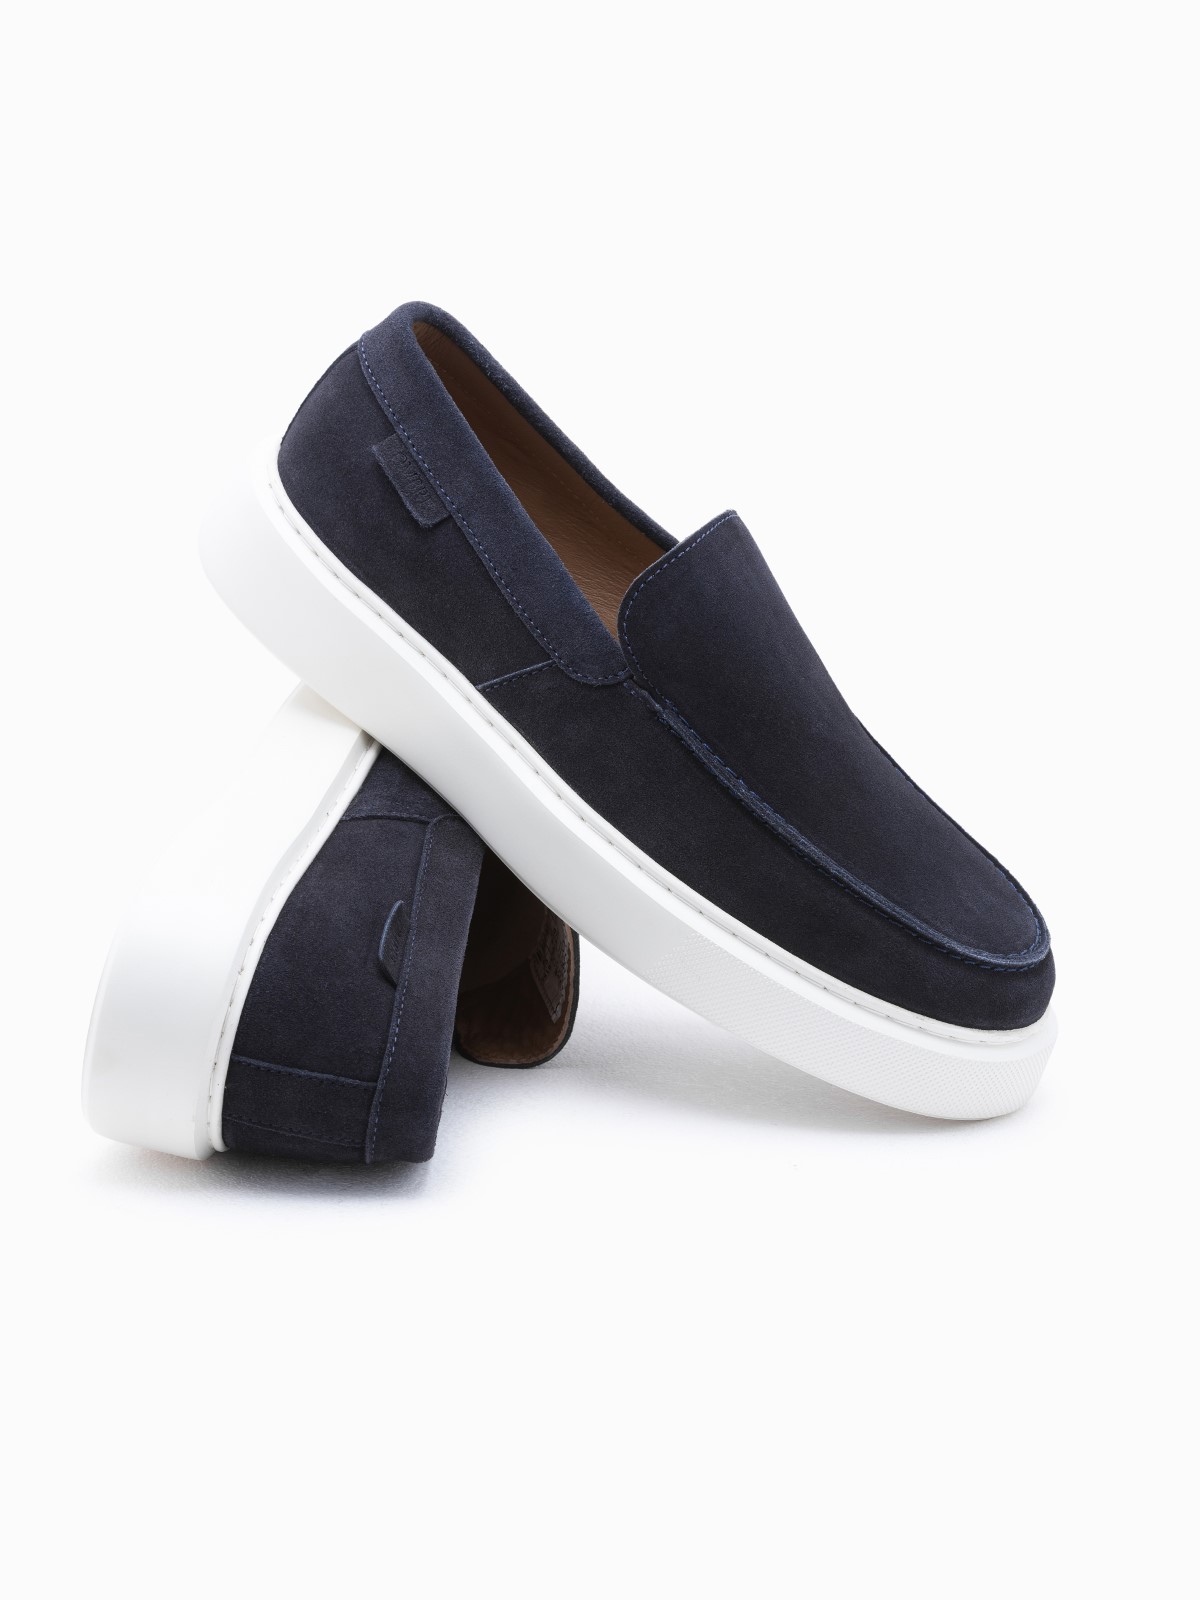 Ombre Men's slip-on half shoes on thick sole - navy blue